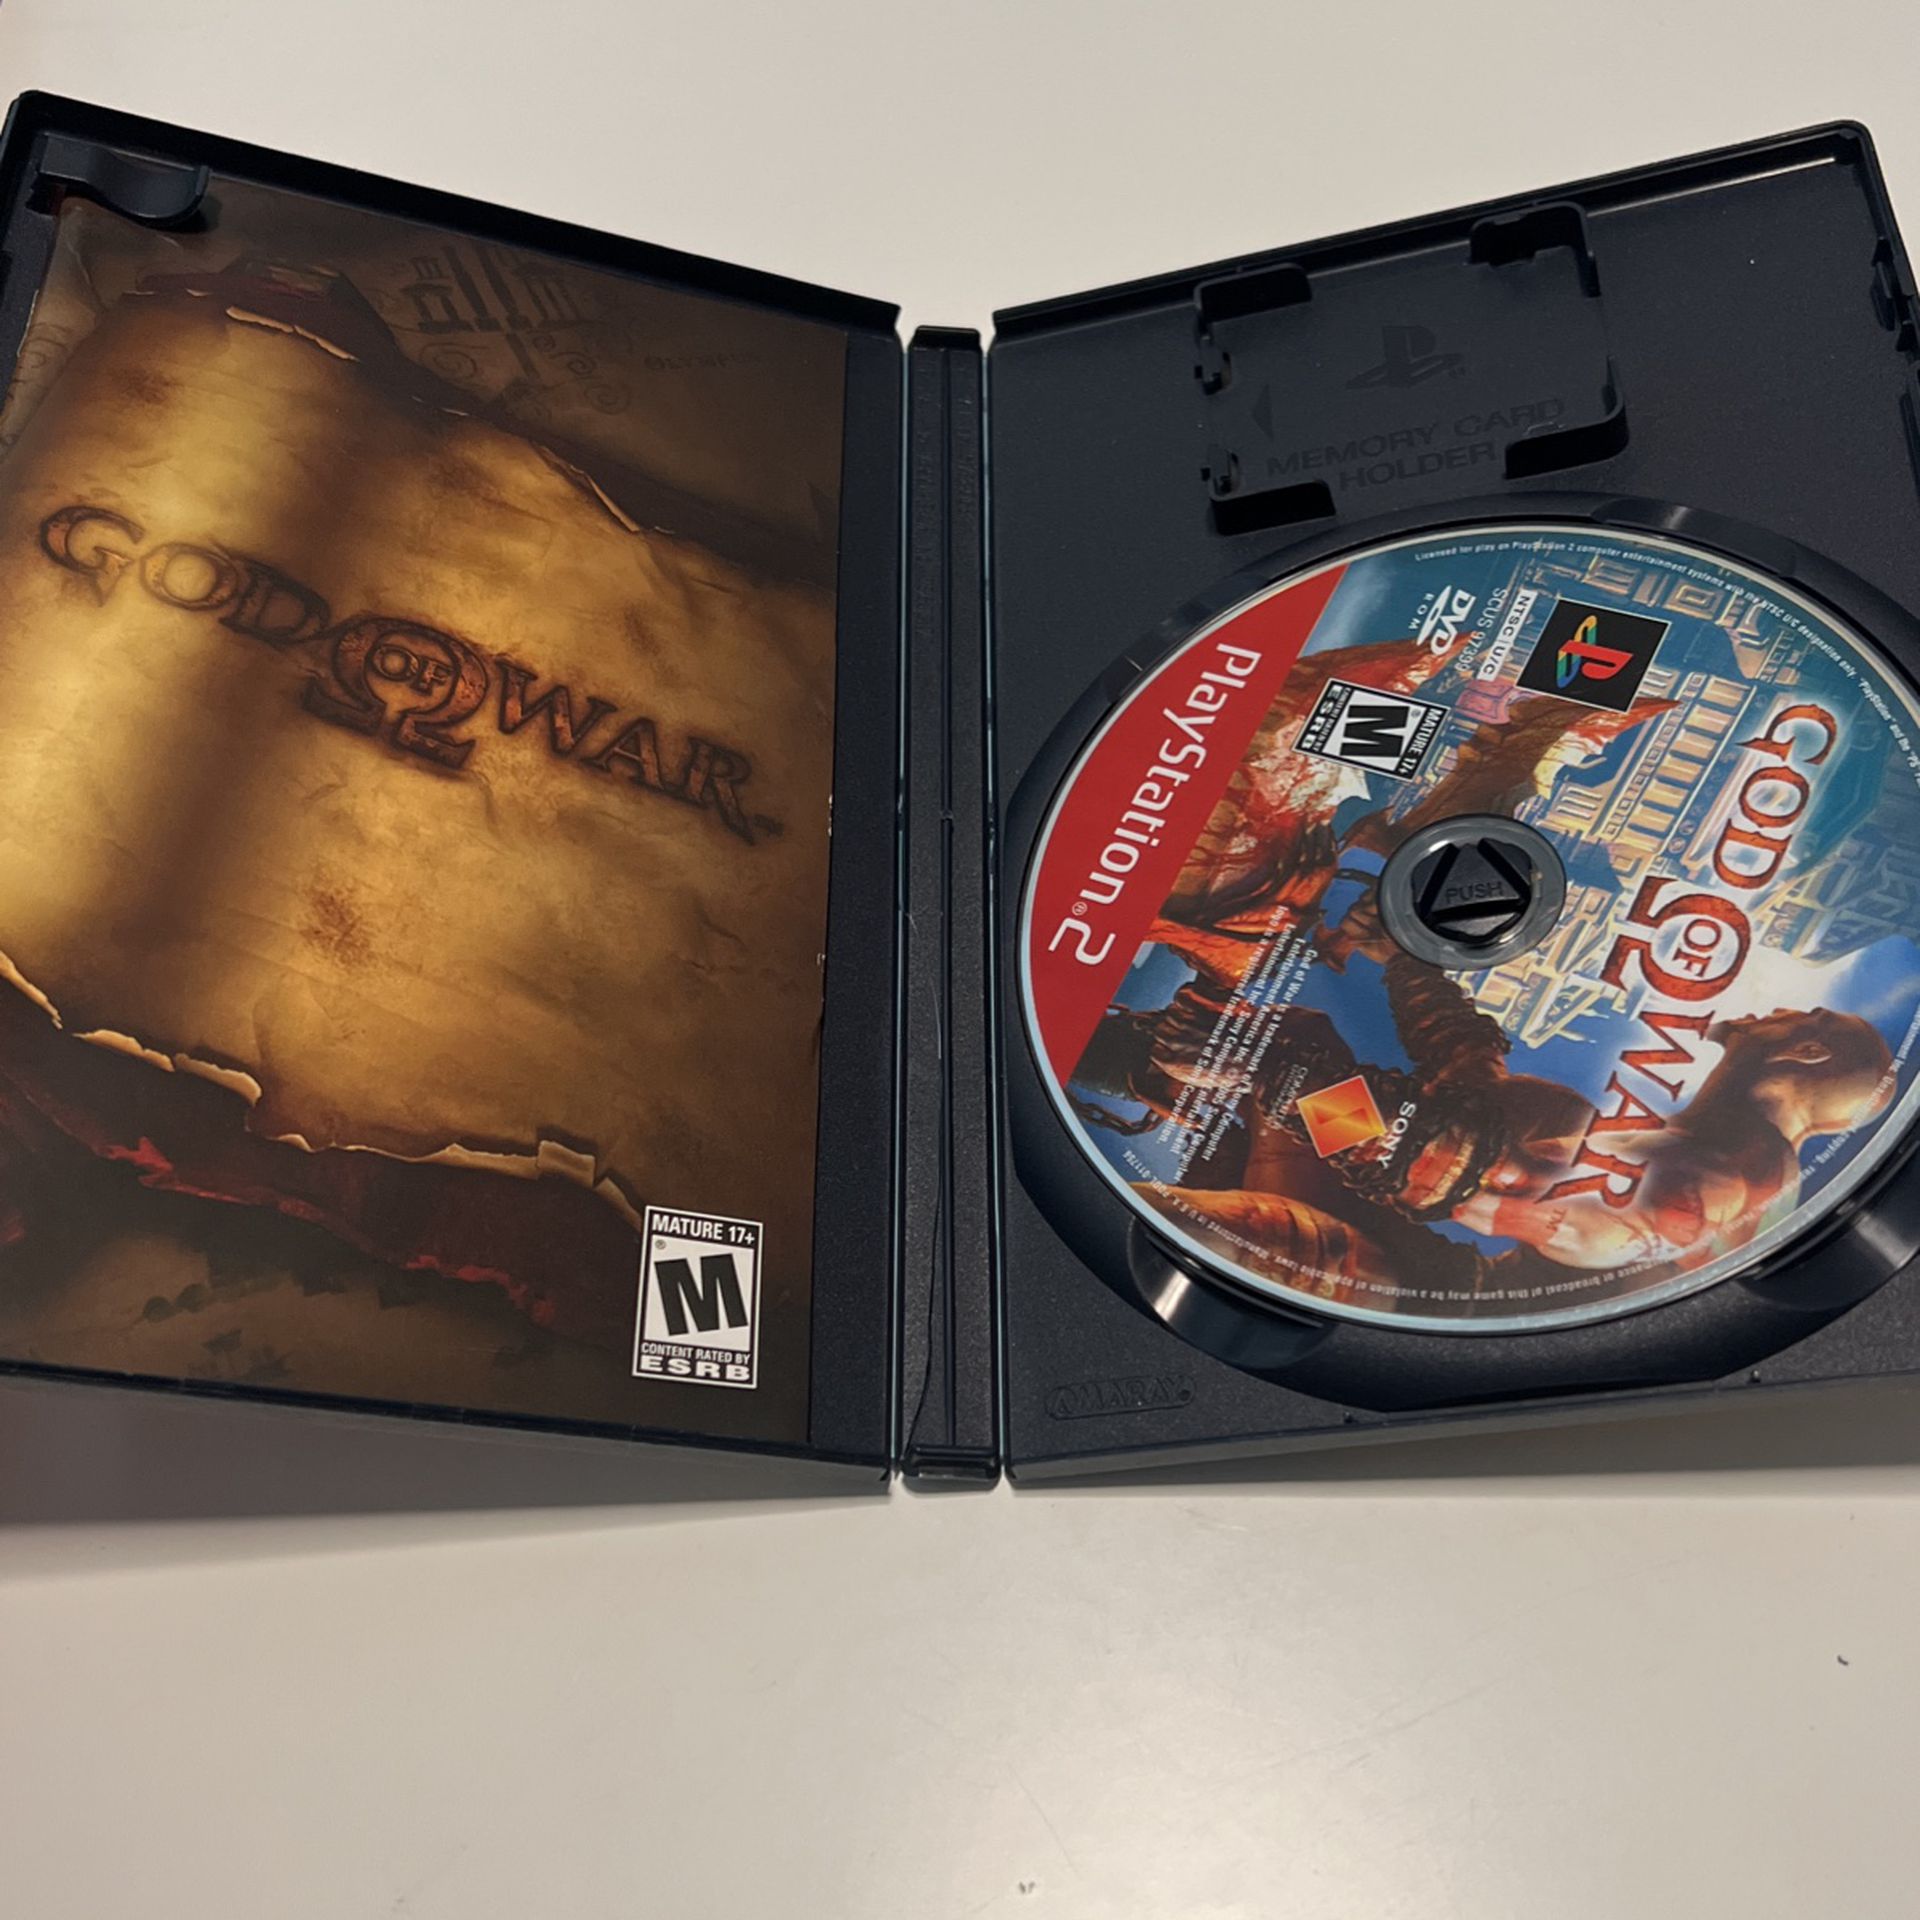 God Of War PS2 Greatest Hits Game CIB